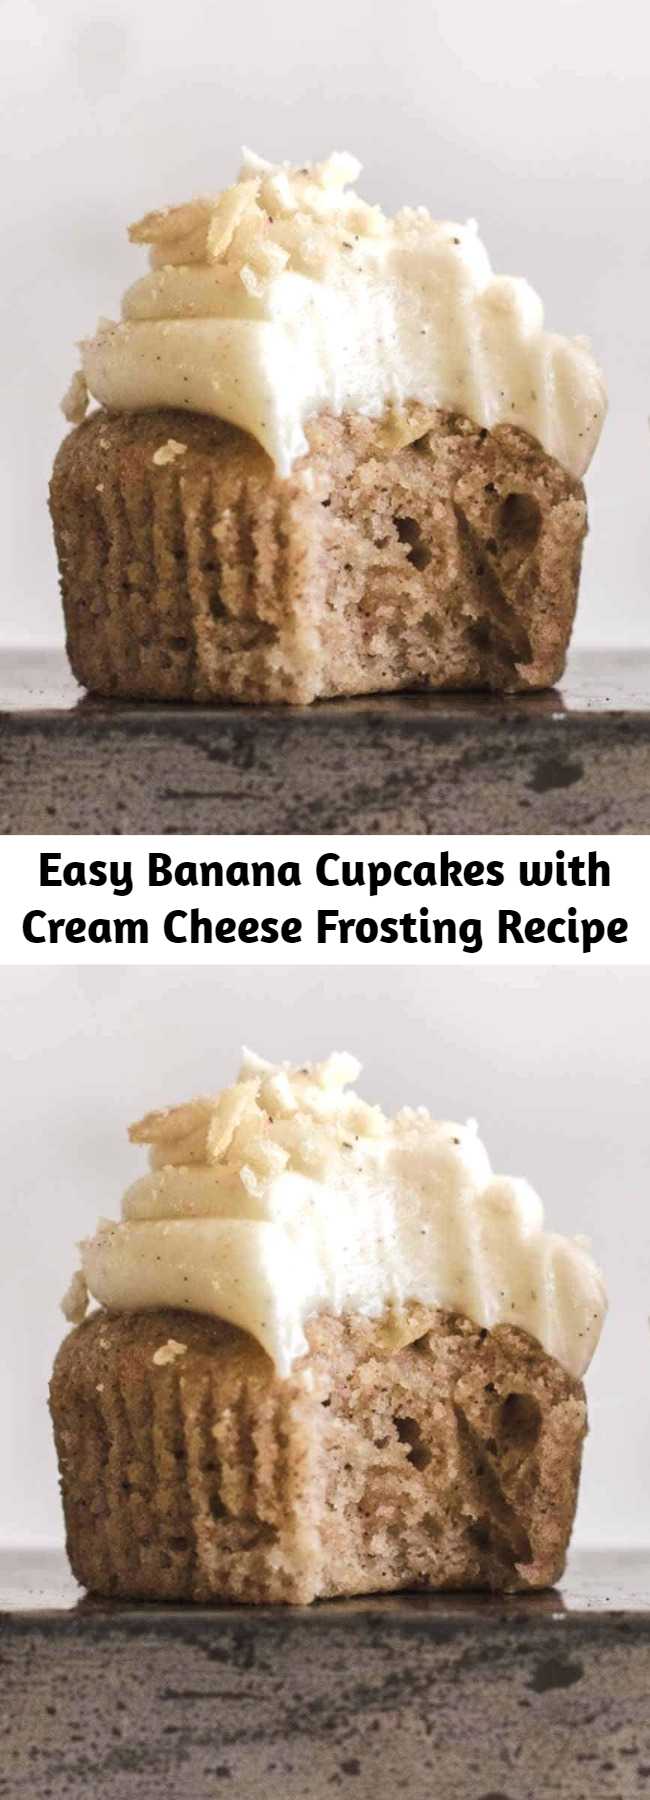 Easy Banana Cupcakes with Cream Cheese Frosting Recipe - These super delicious banana cupcakes topped with cream cheese frosting are very easy to make. Made from scratch with fresh bananas. Soft, moist, and creamy.